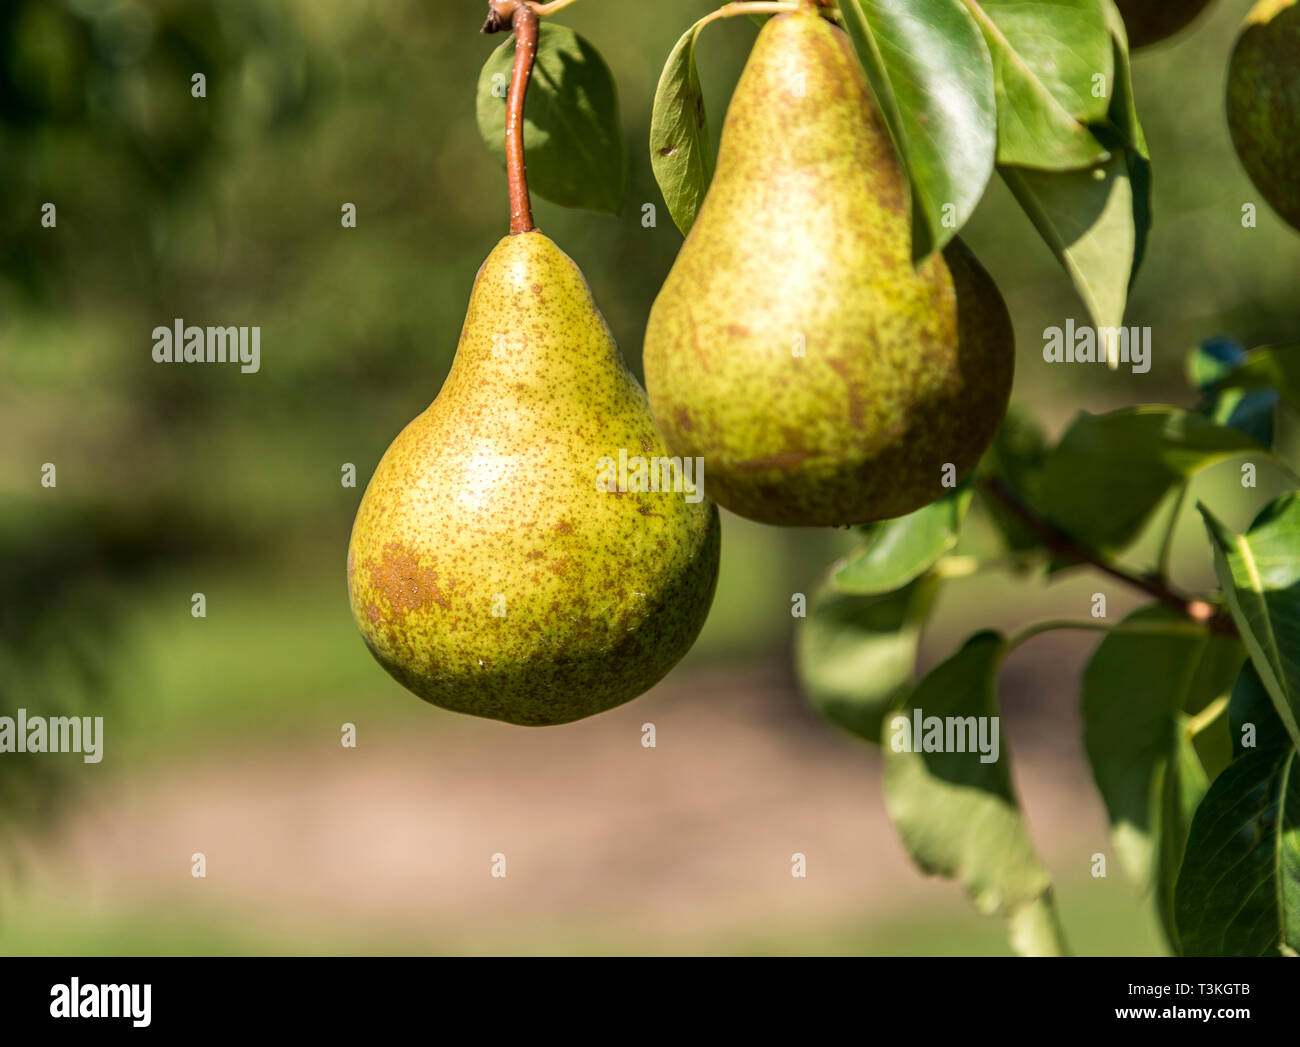 Two green pears hanging on a tree ready for harvest. Stock Photo